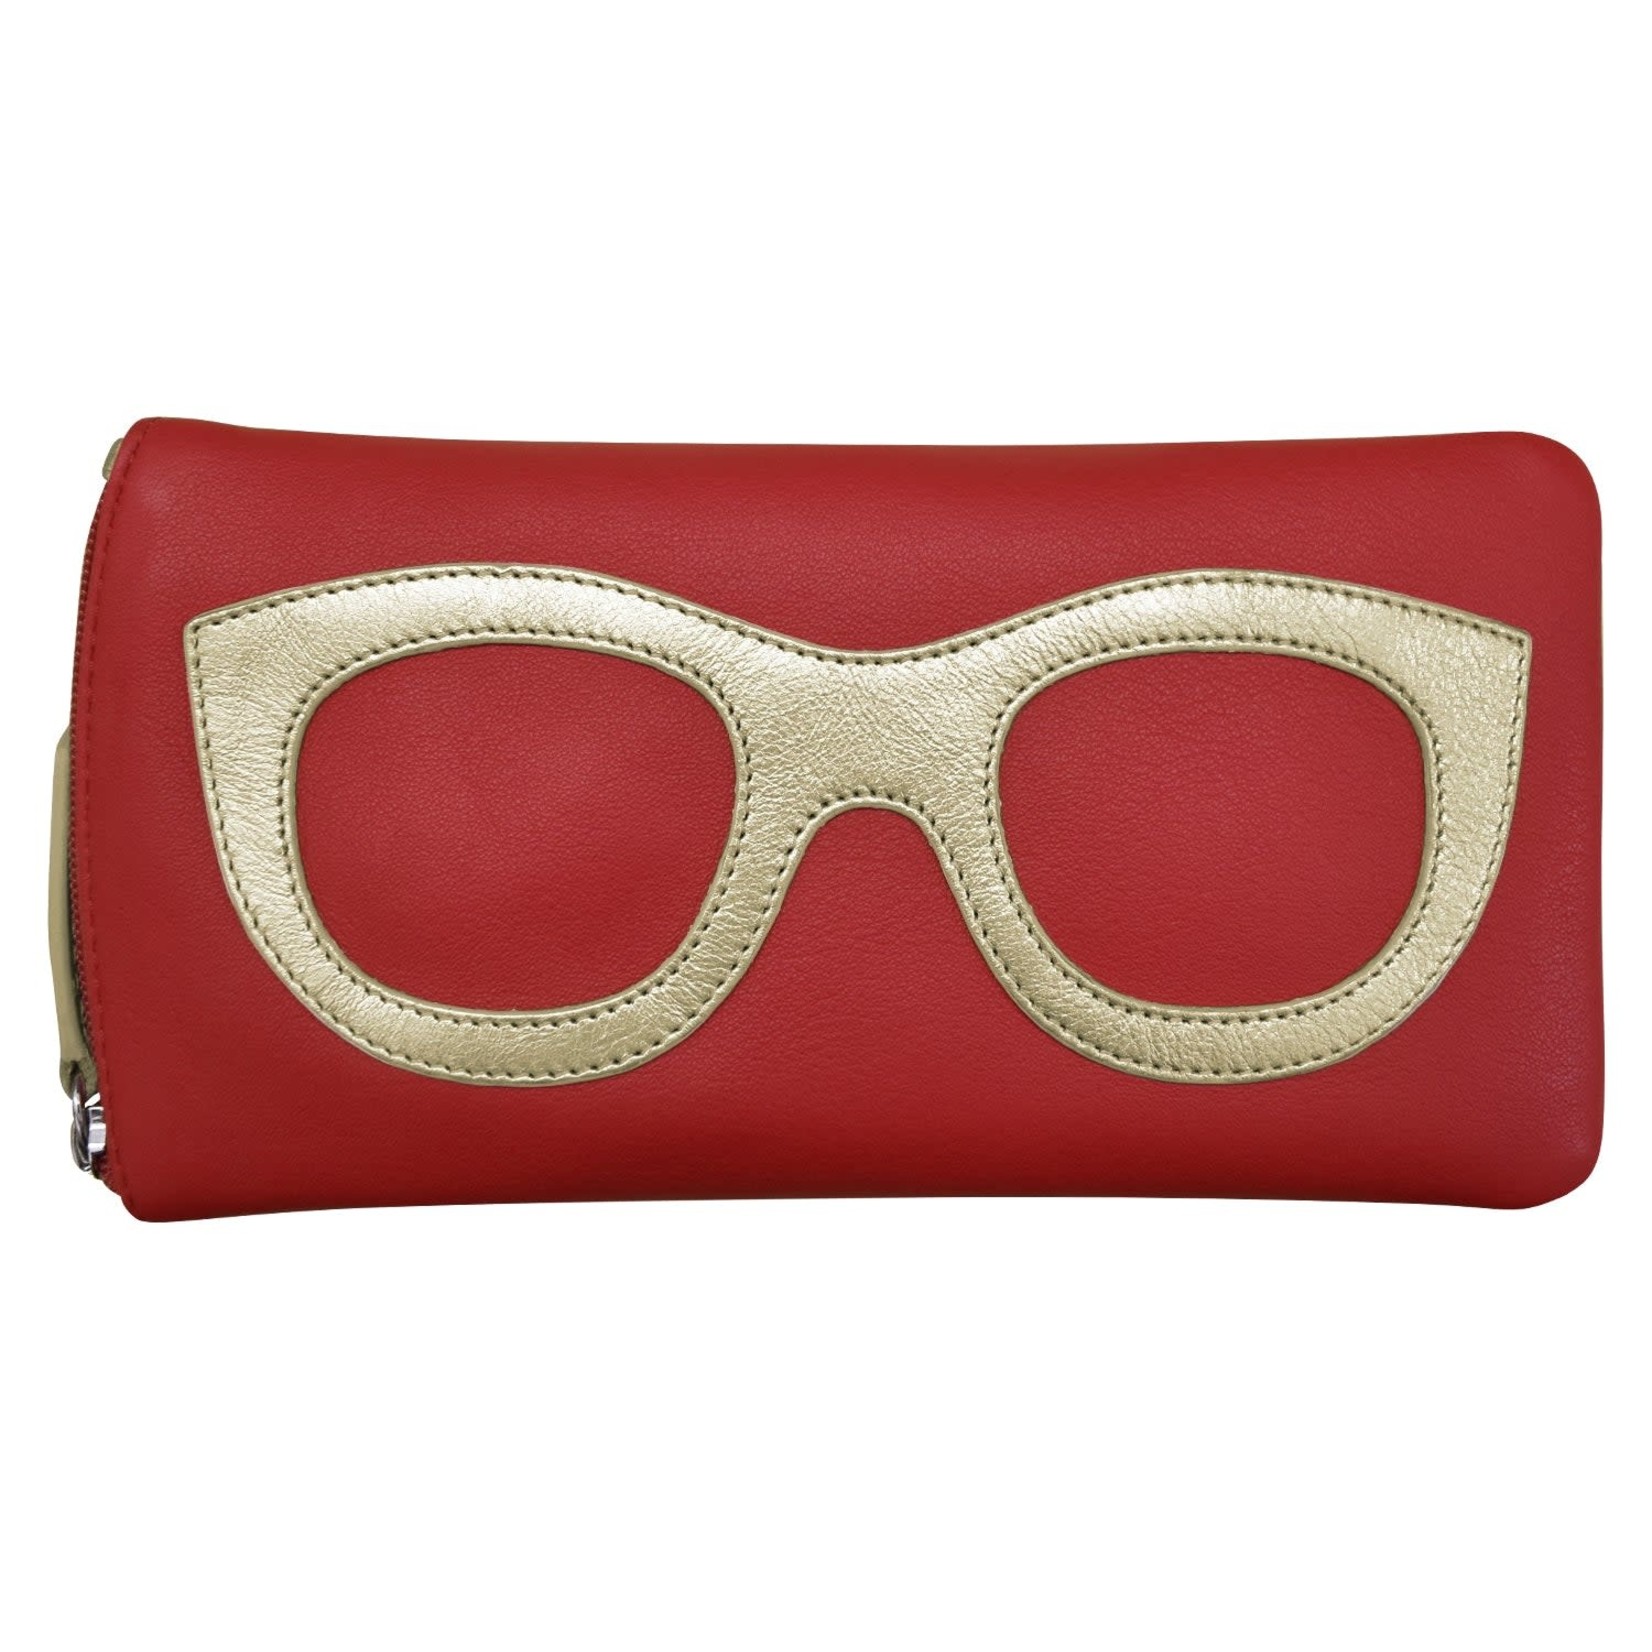 Leather Handbags and Accessories 6462 Red/Light Gold - Leather Eyeglass Case